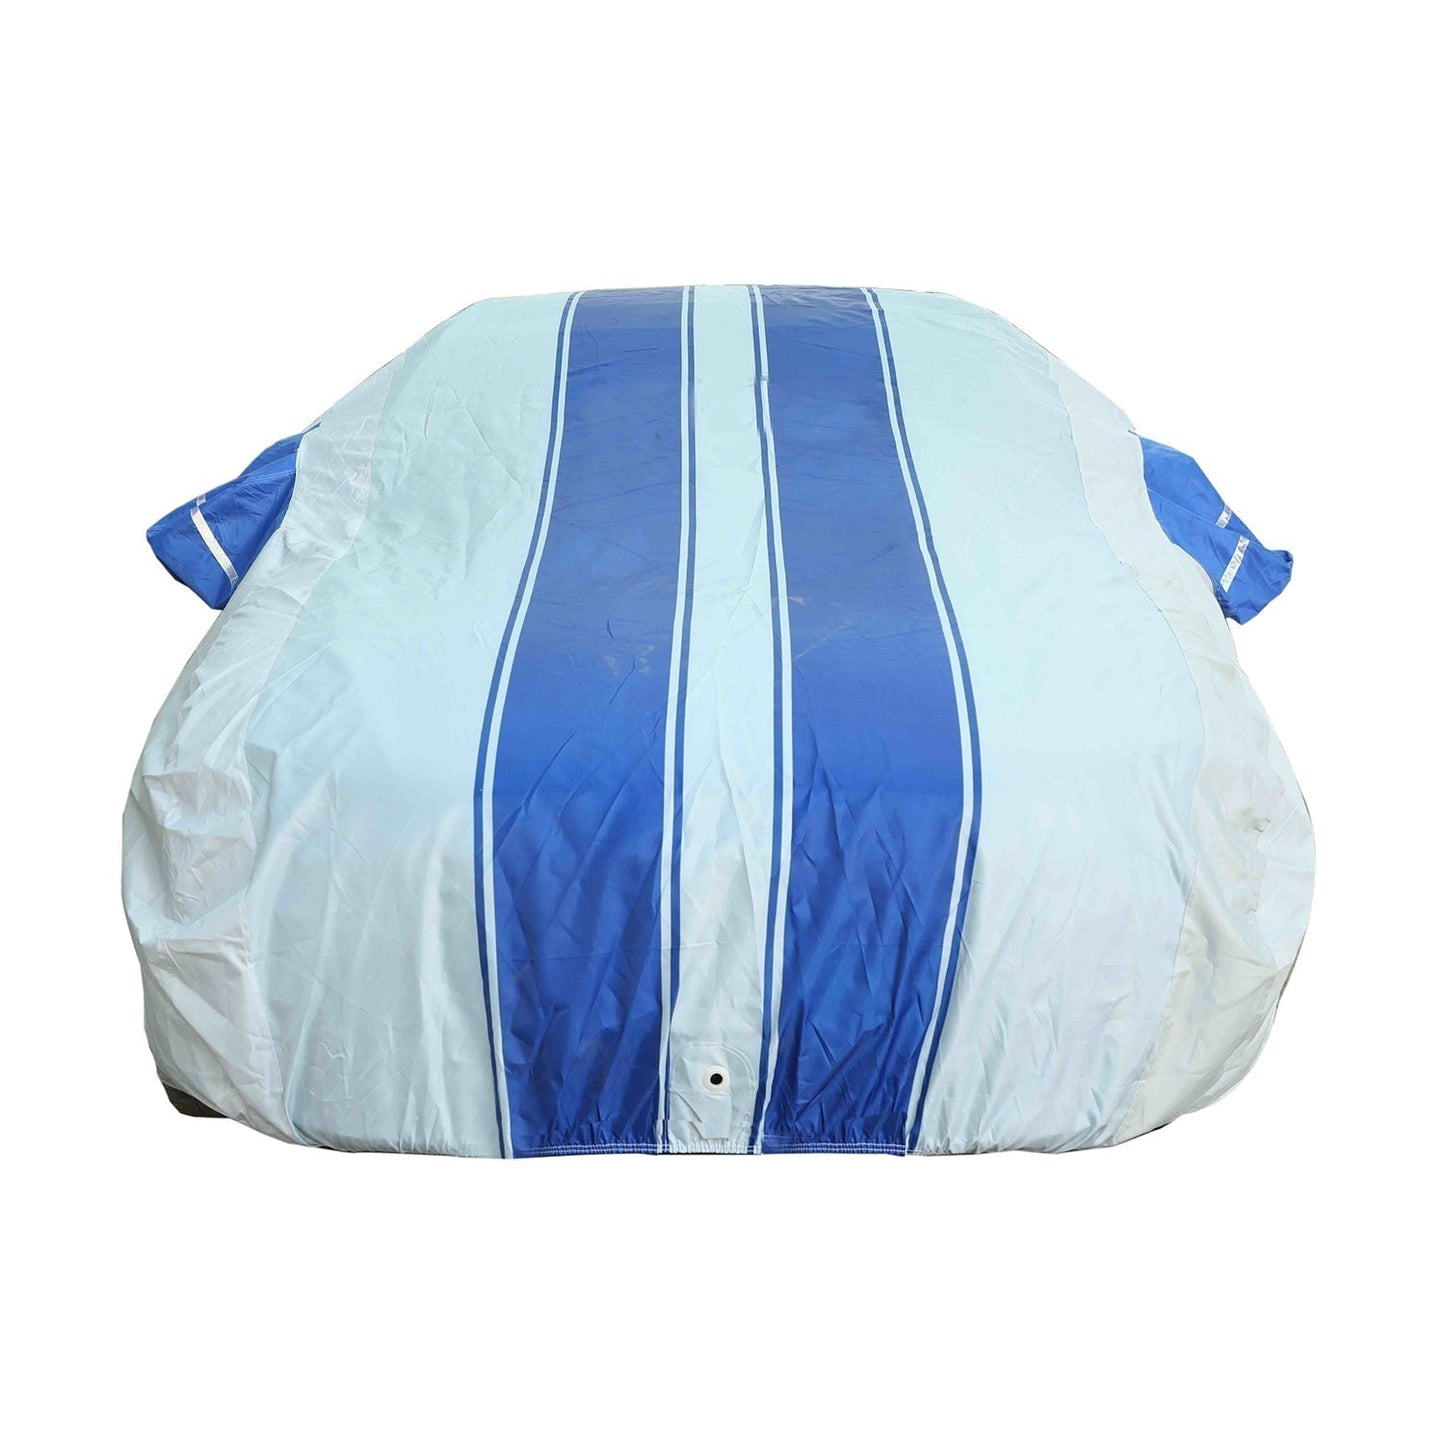 Oshotto 100% Blue dustproof and Water Resistant Car Body Cover with Mirror Pockets For Tata Harrier